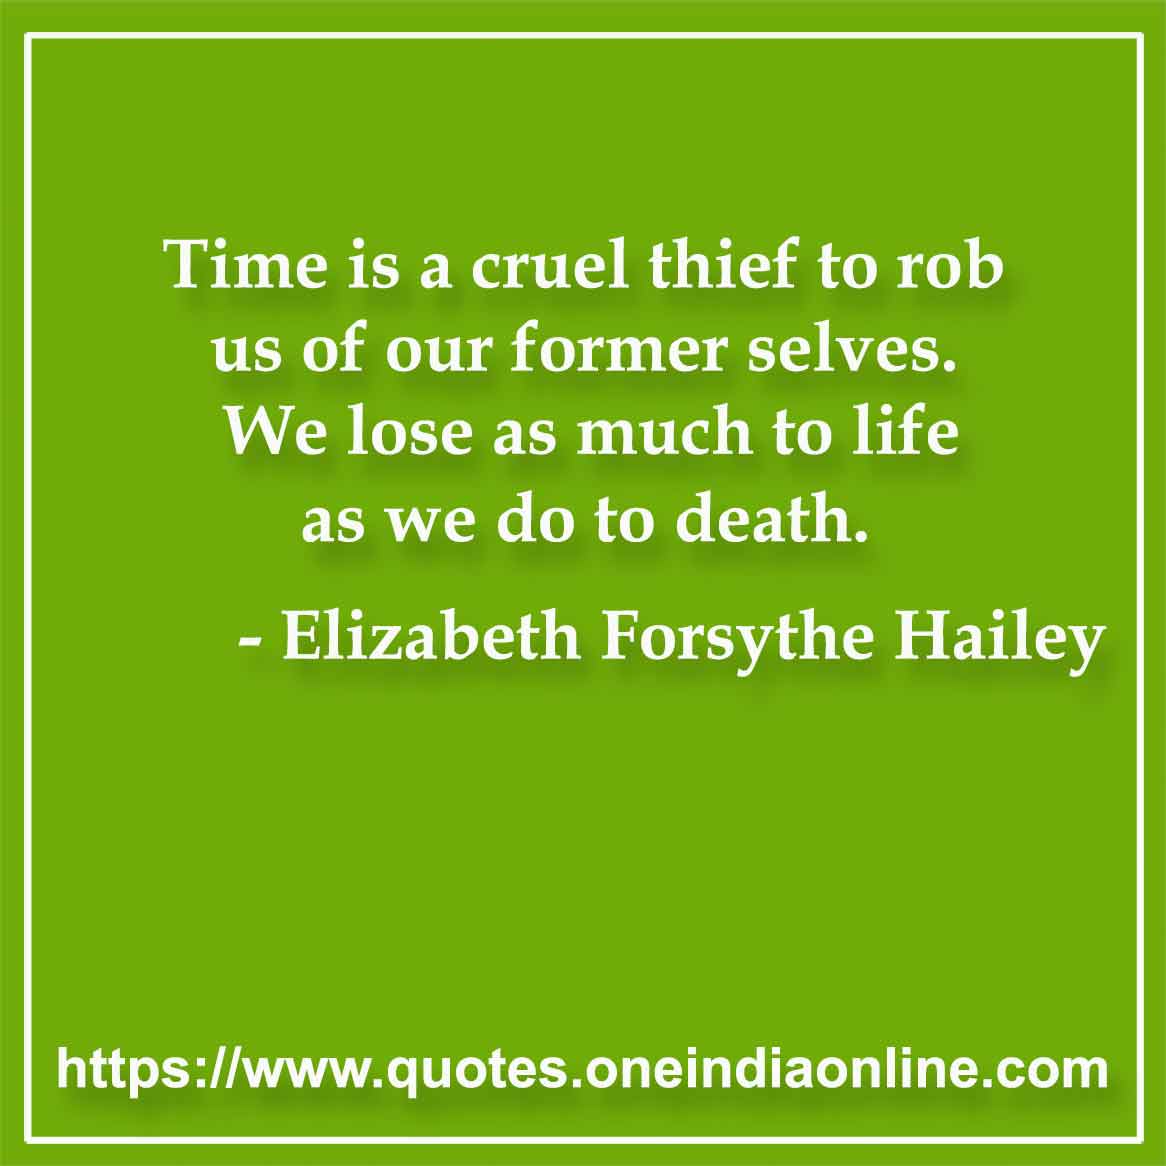 Time is a cruel thief to rob us of our former selves. We lose as much to life as we do to death.

- Time Quotes by Elizabeth Forsythe Hailey